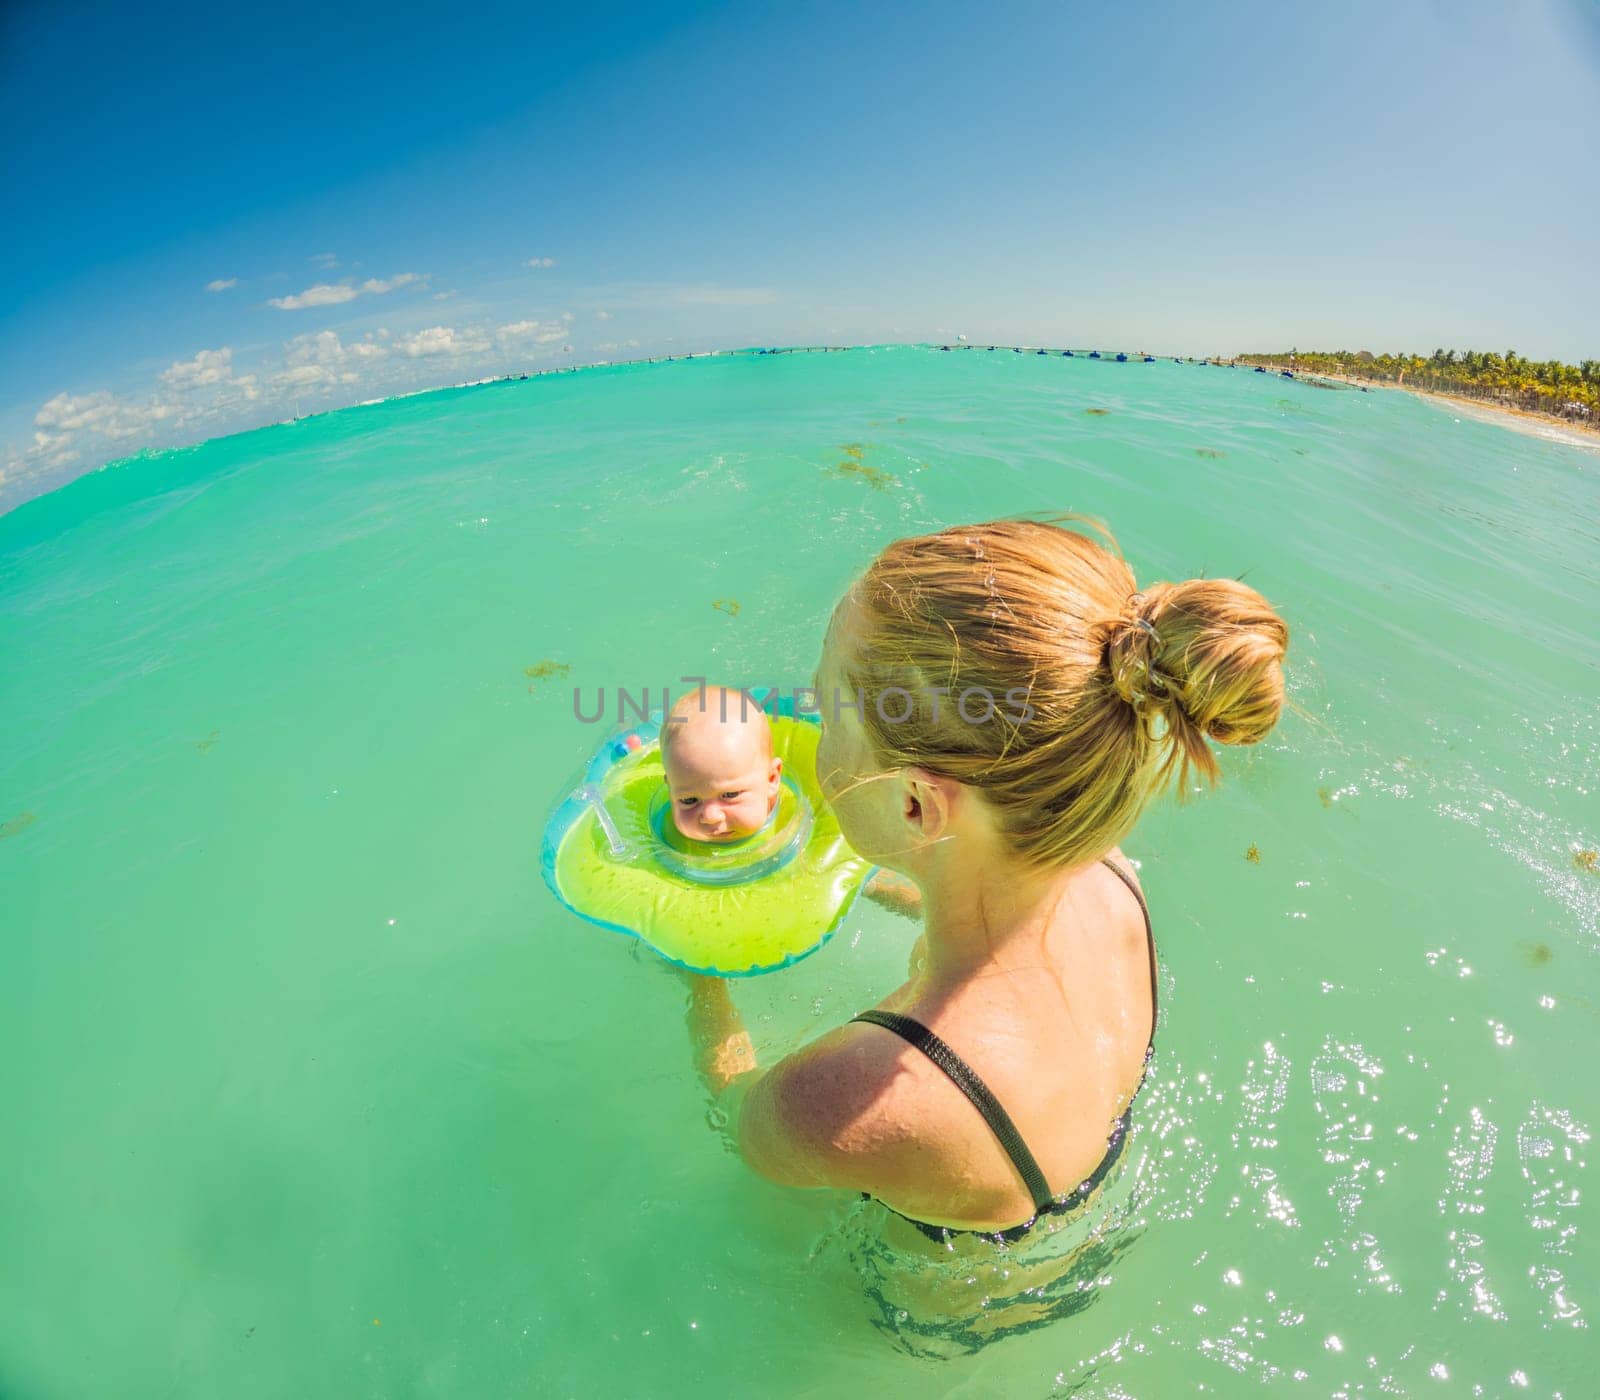 Adorable baby swims in an inflatable ring around his neck, enjoying the sea with his mom. by galitskaya